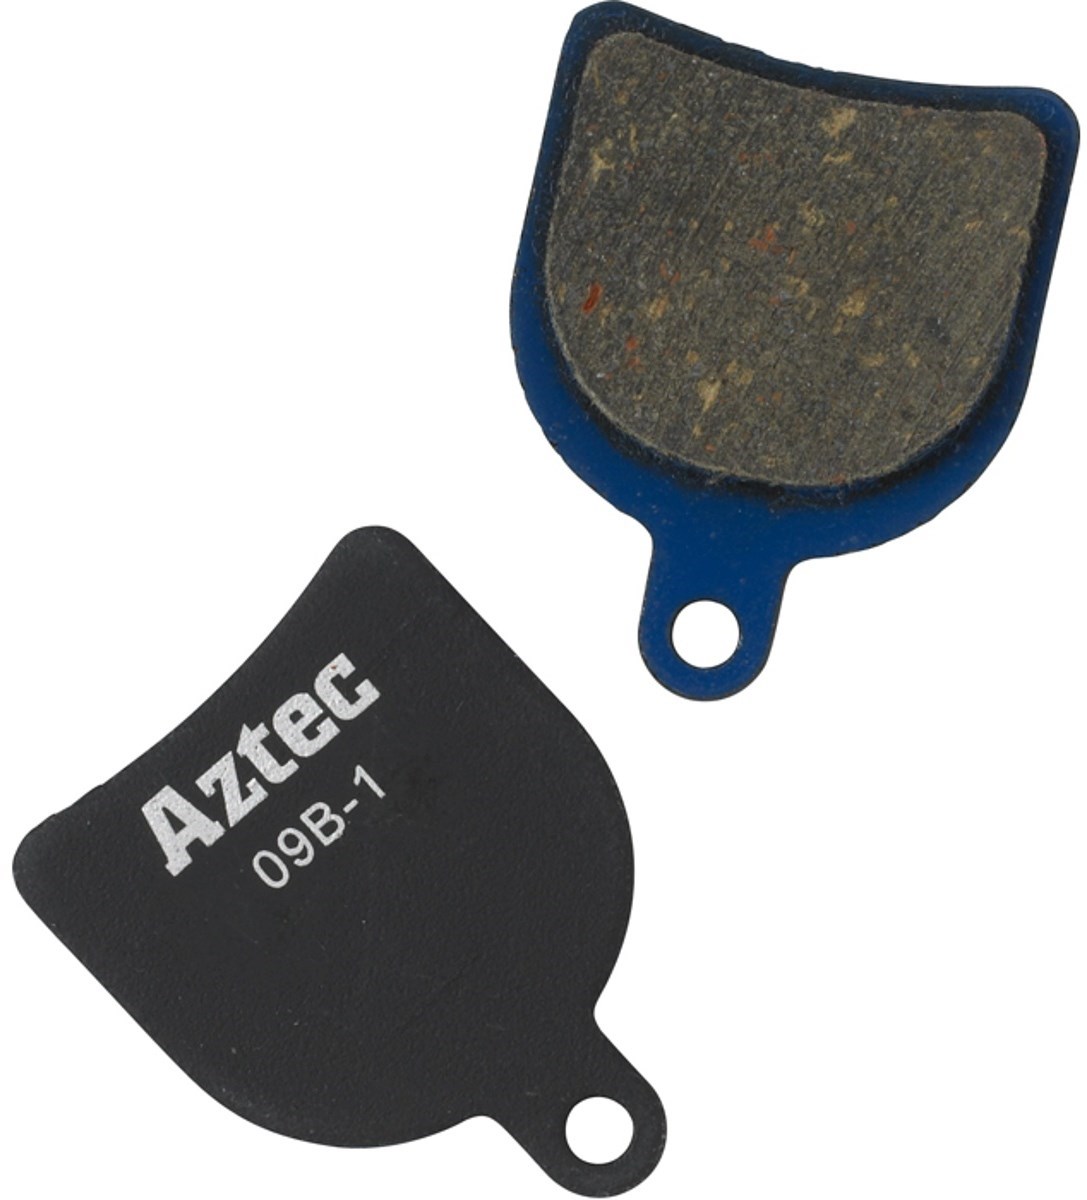 Aztec Organic Disc Brake Pads For Hope Mono Trial product image